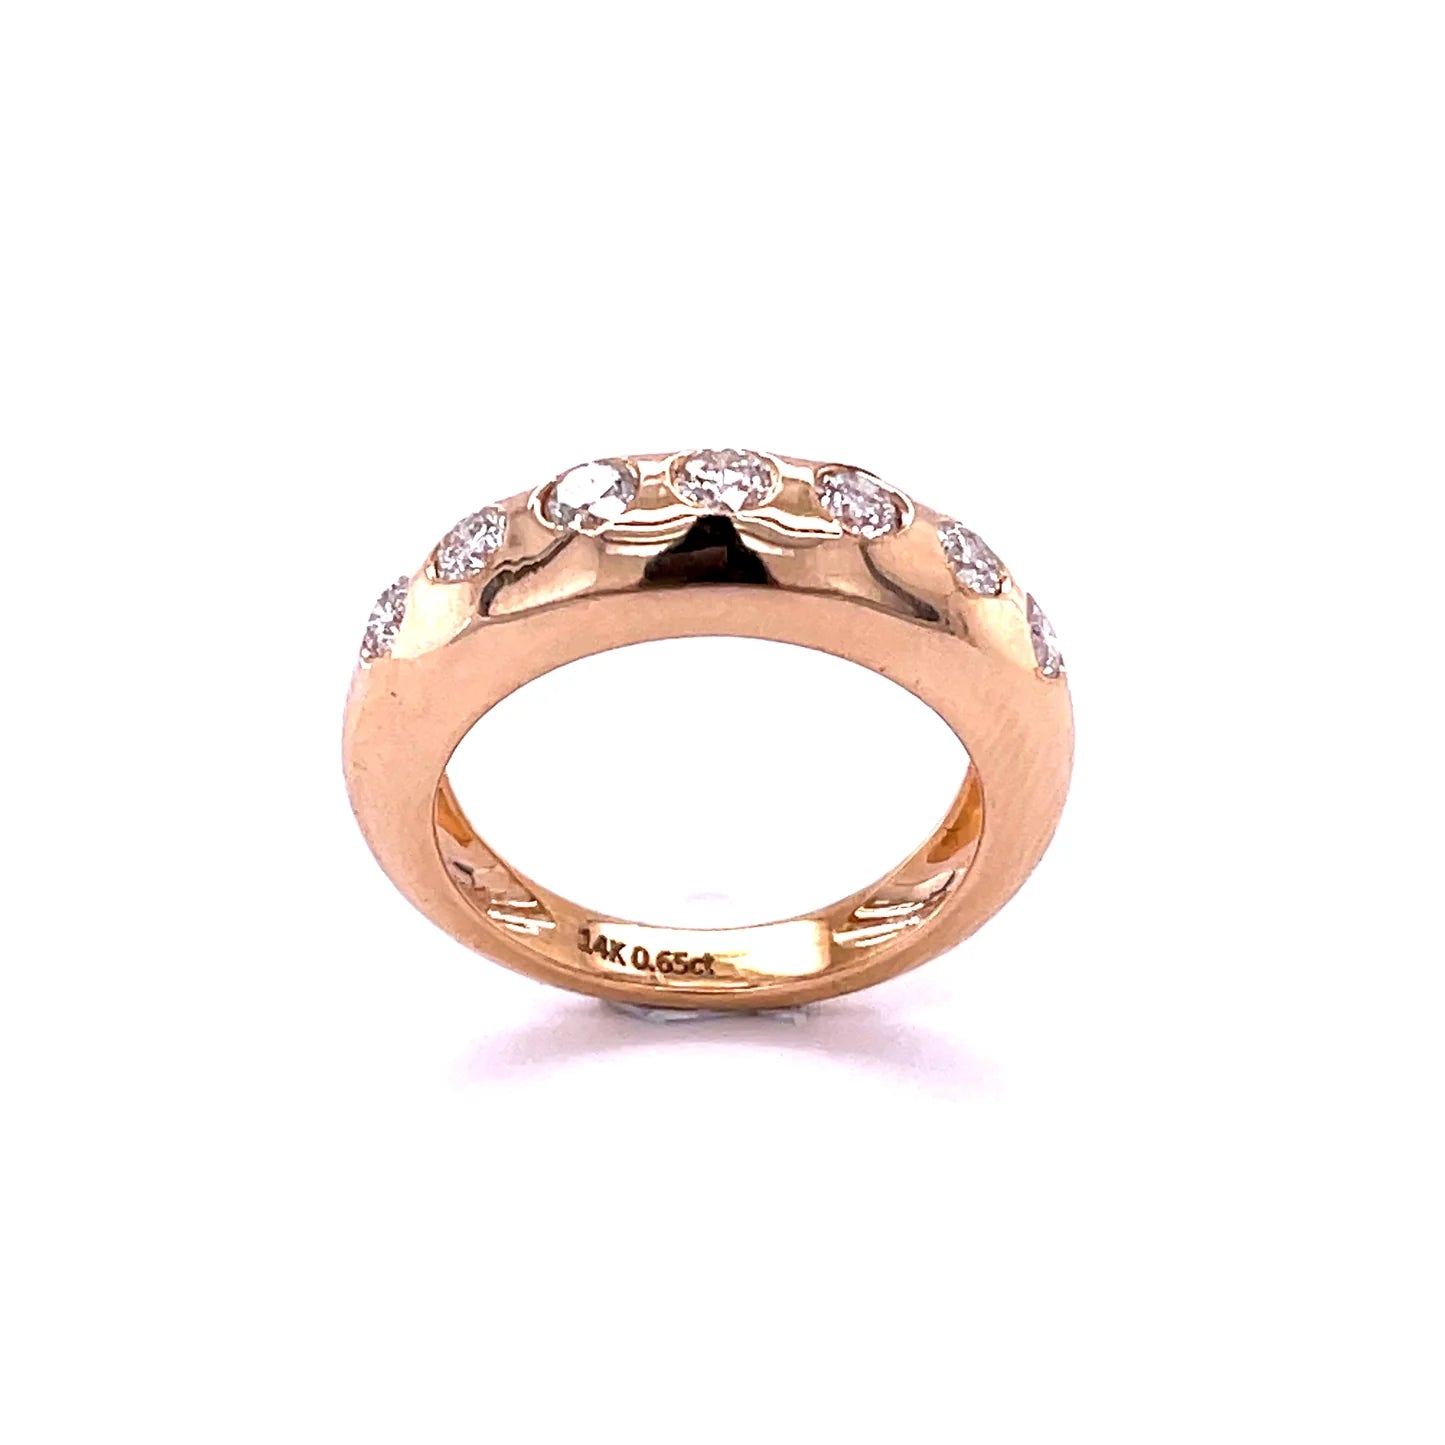 14kt Yellow Gold Diamond Dome Ring